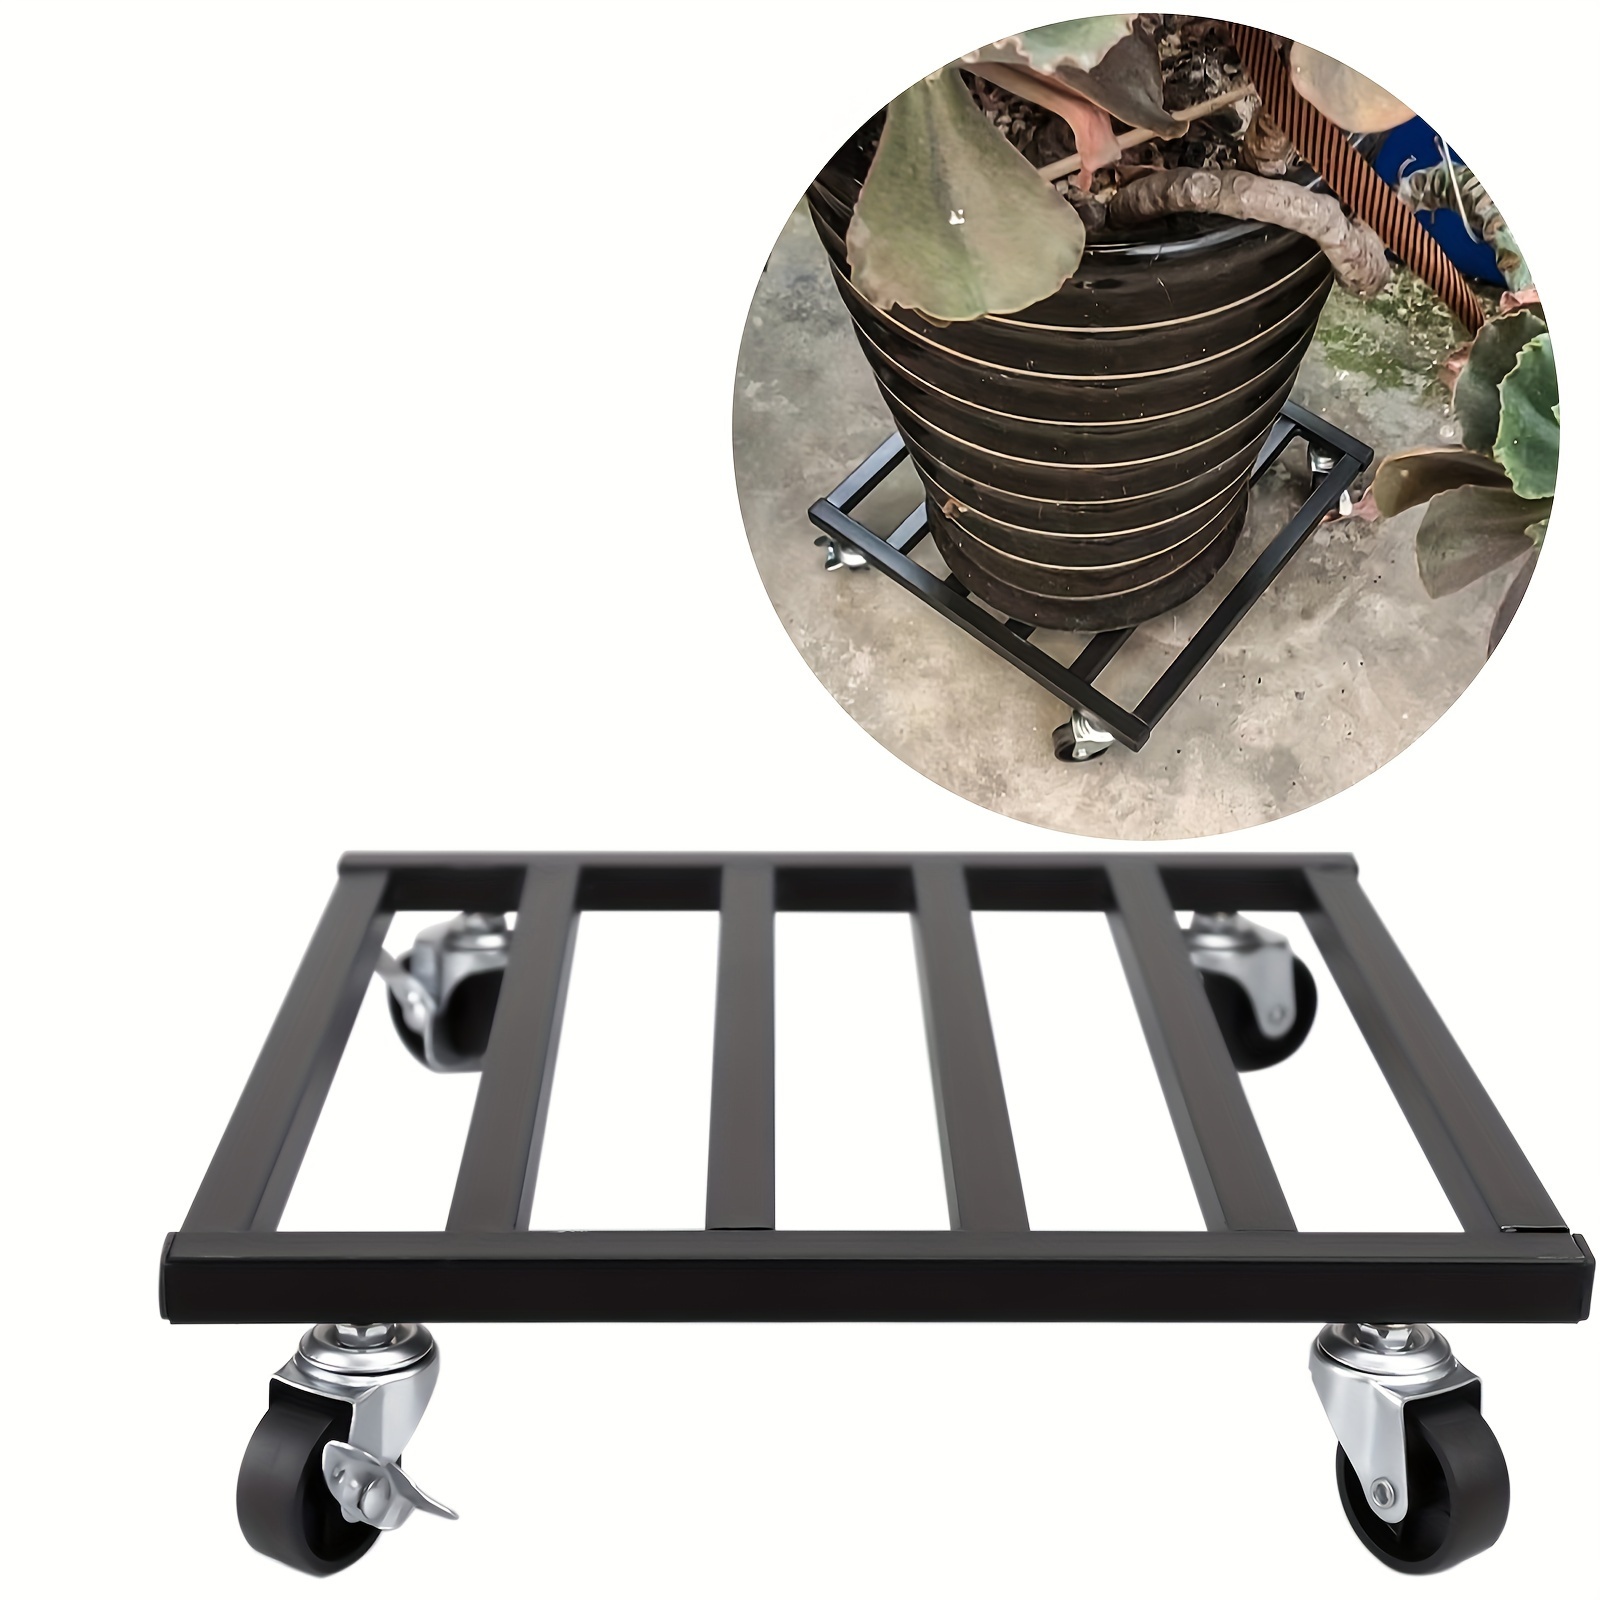 

Heavy Duty Metal Plant Caddy With Lockable Wheels - 10"/12" Square Black Plant Stand Dolly For Indoor & Outdoor Use, Holds Up To 150 Lbs Pots, Ideal For Garden Tools & Lawn Care - 1pc